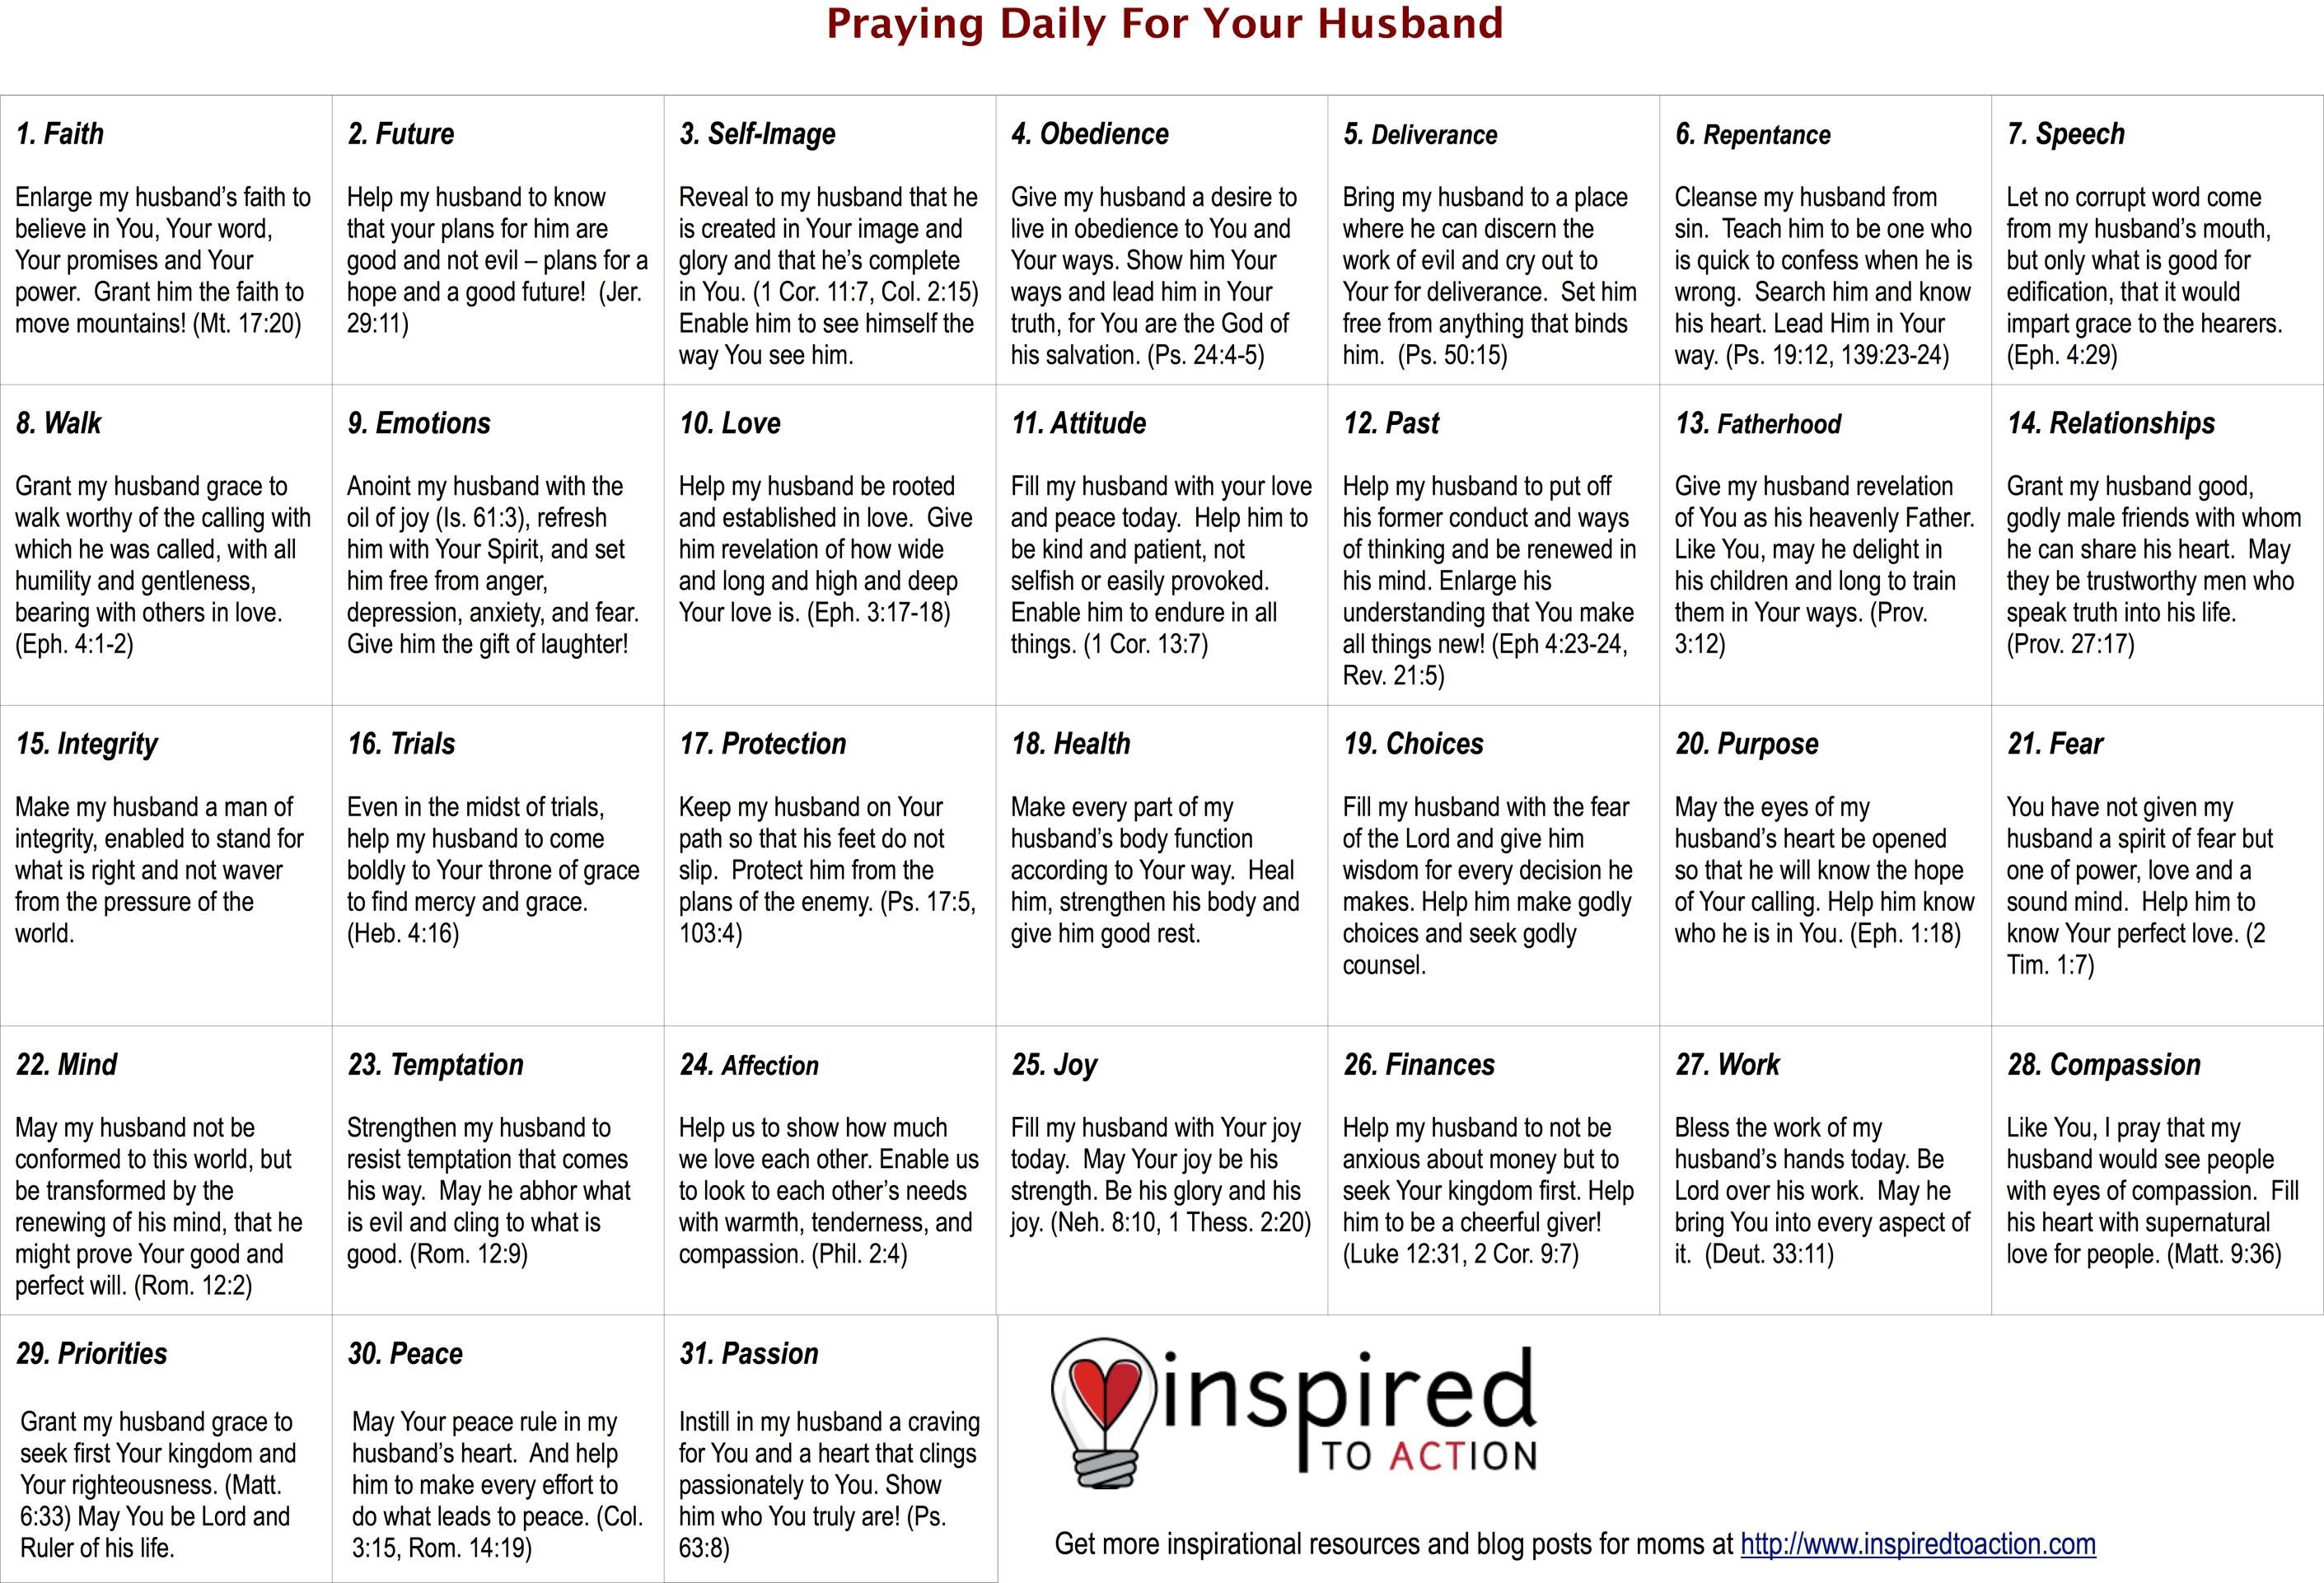 Praying Daily For Your Husband (With Images) | Prayer For